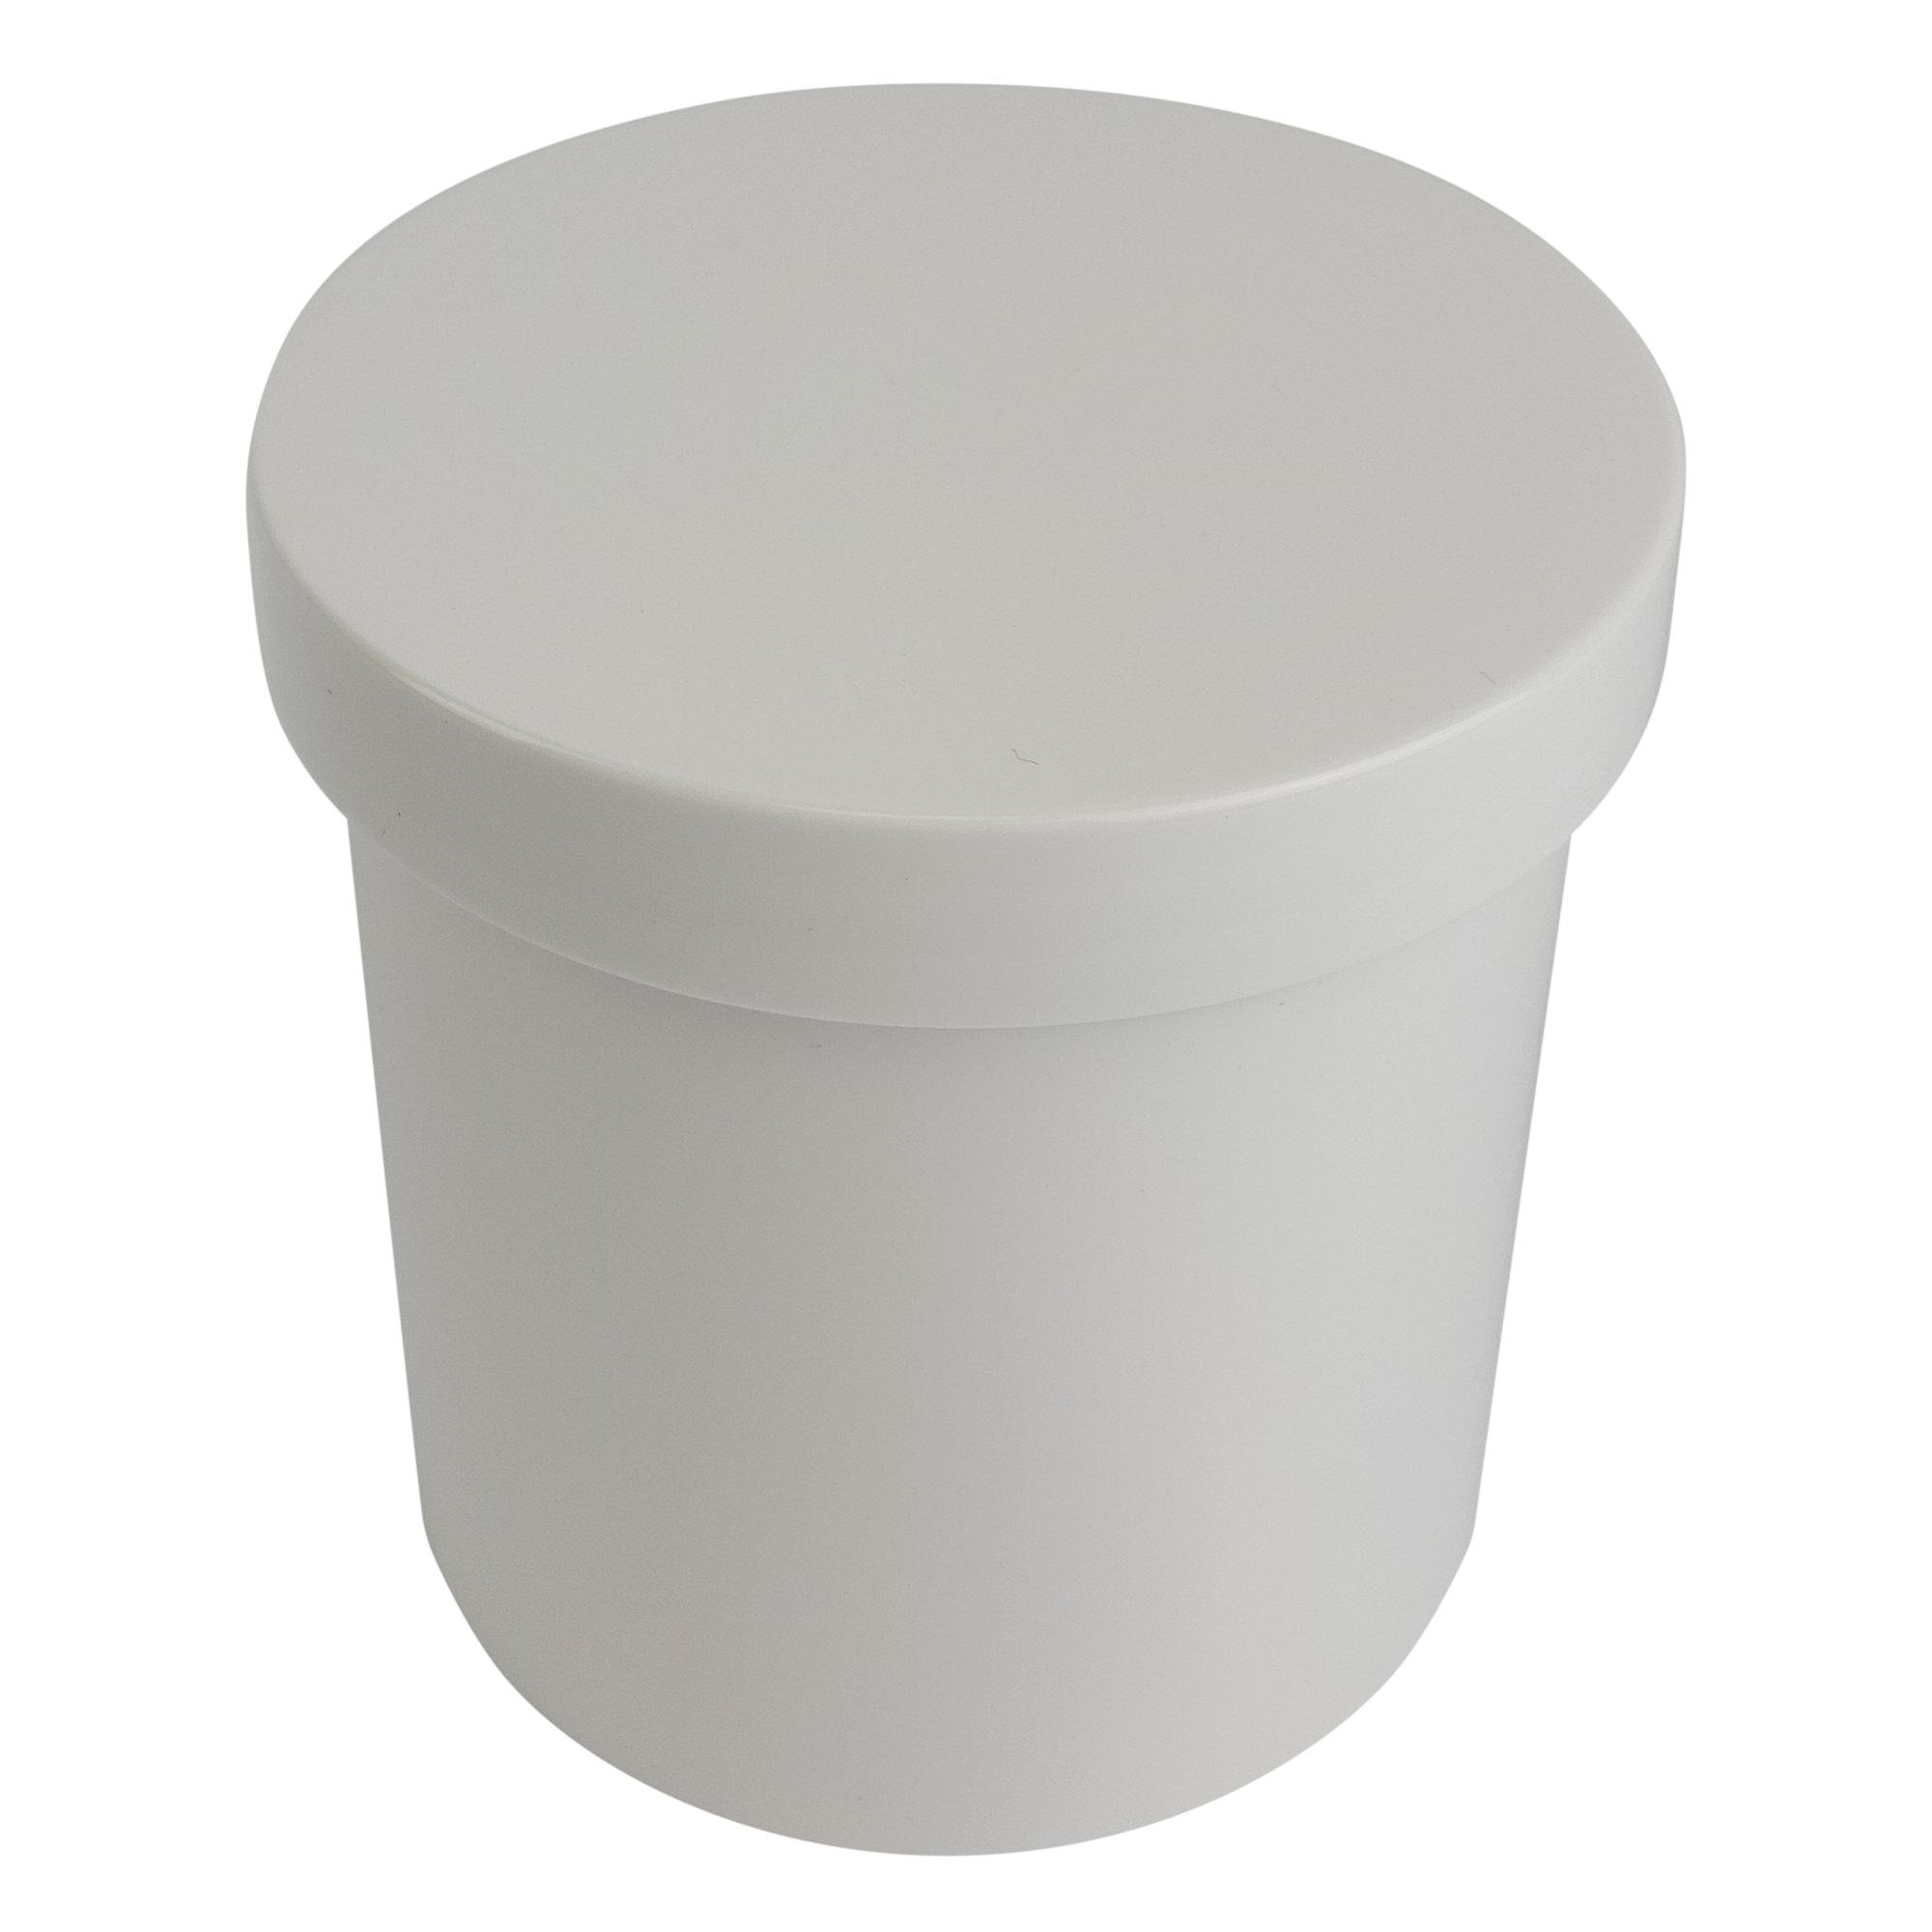 https://store.rxsystems.com/wp-content/uploads/2021/07/Ointment-Jar.png